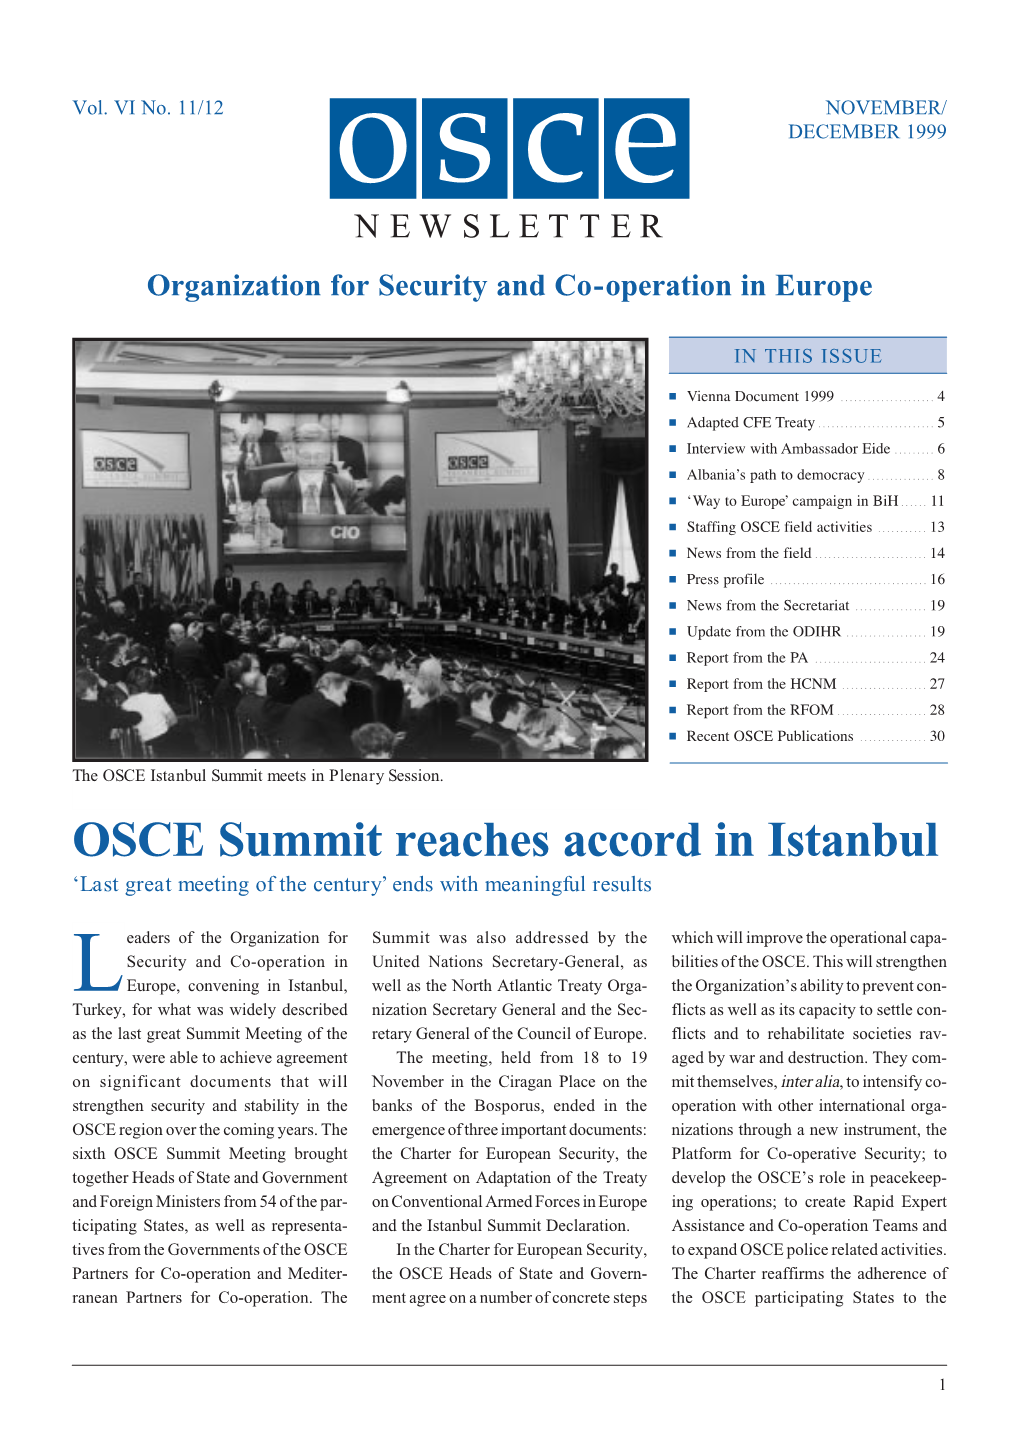 OSCE Summit Reaches Accord in Istanbul ‘Last Great Meeting of the Century’ Ends with Meaningful Results